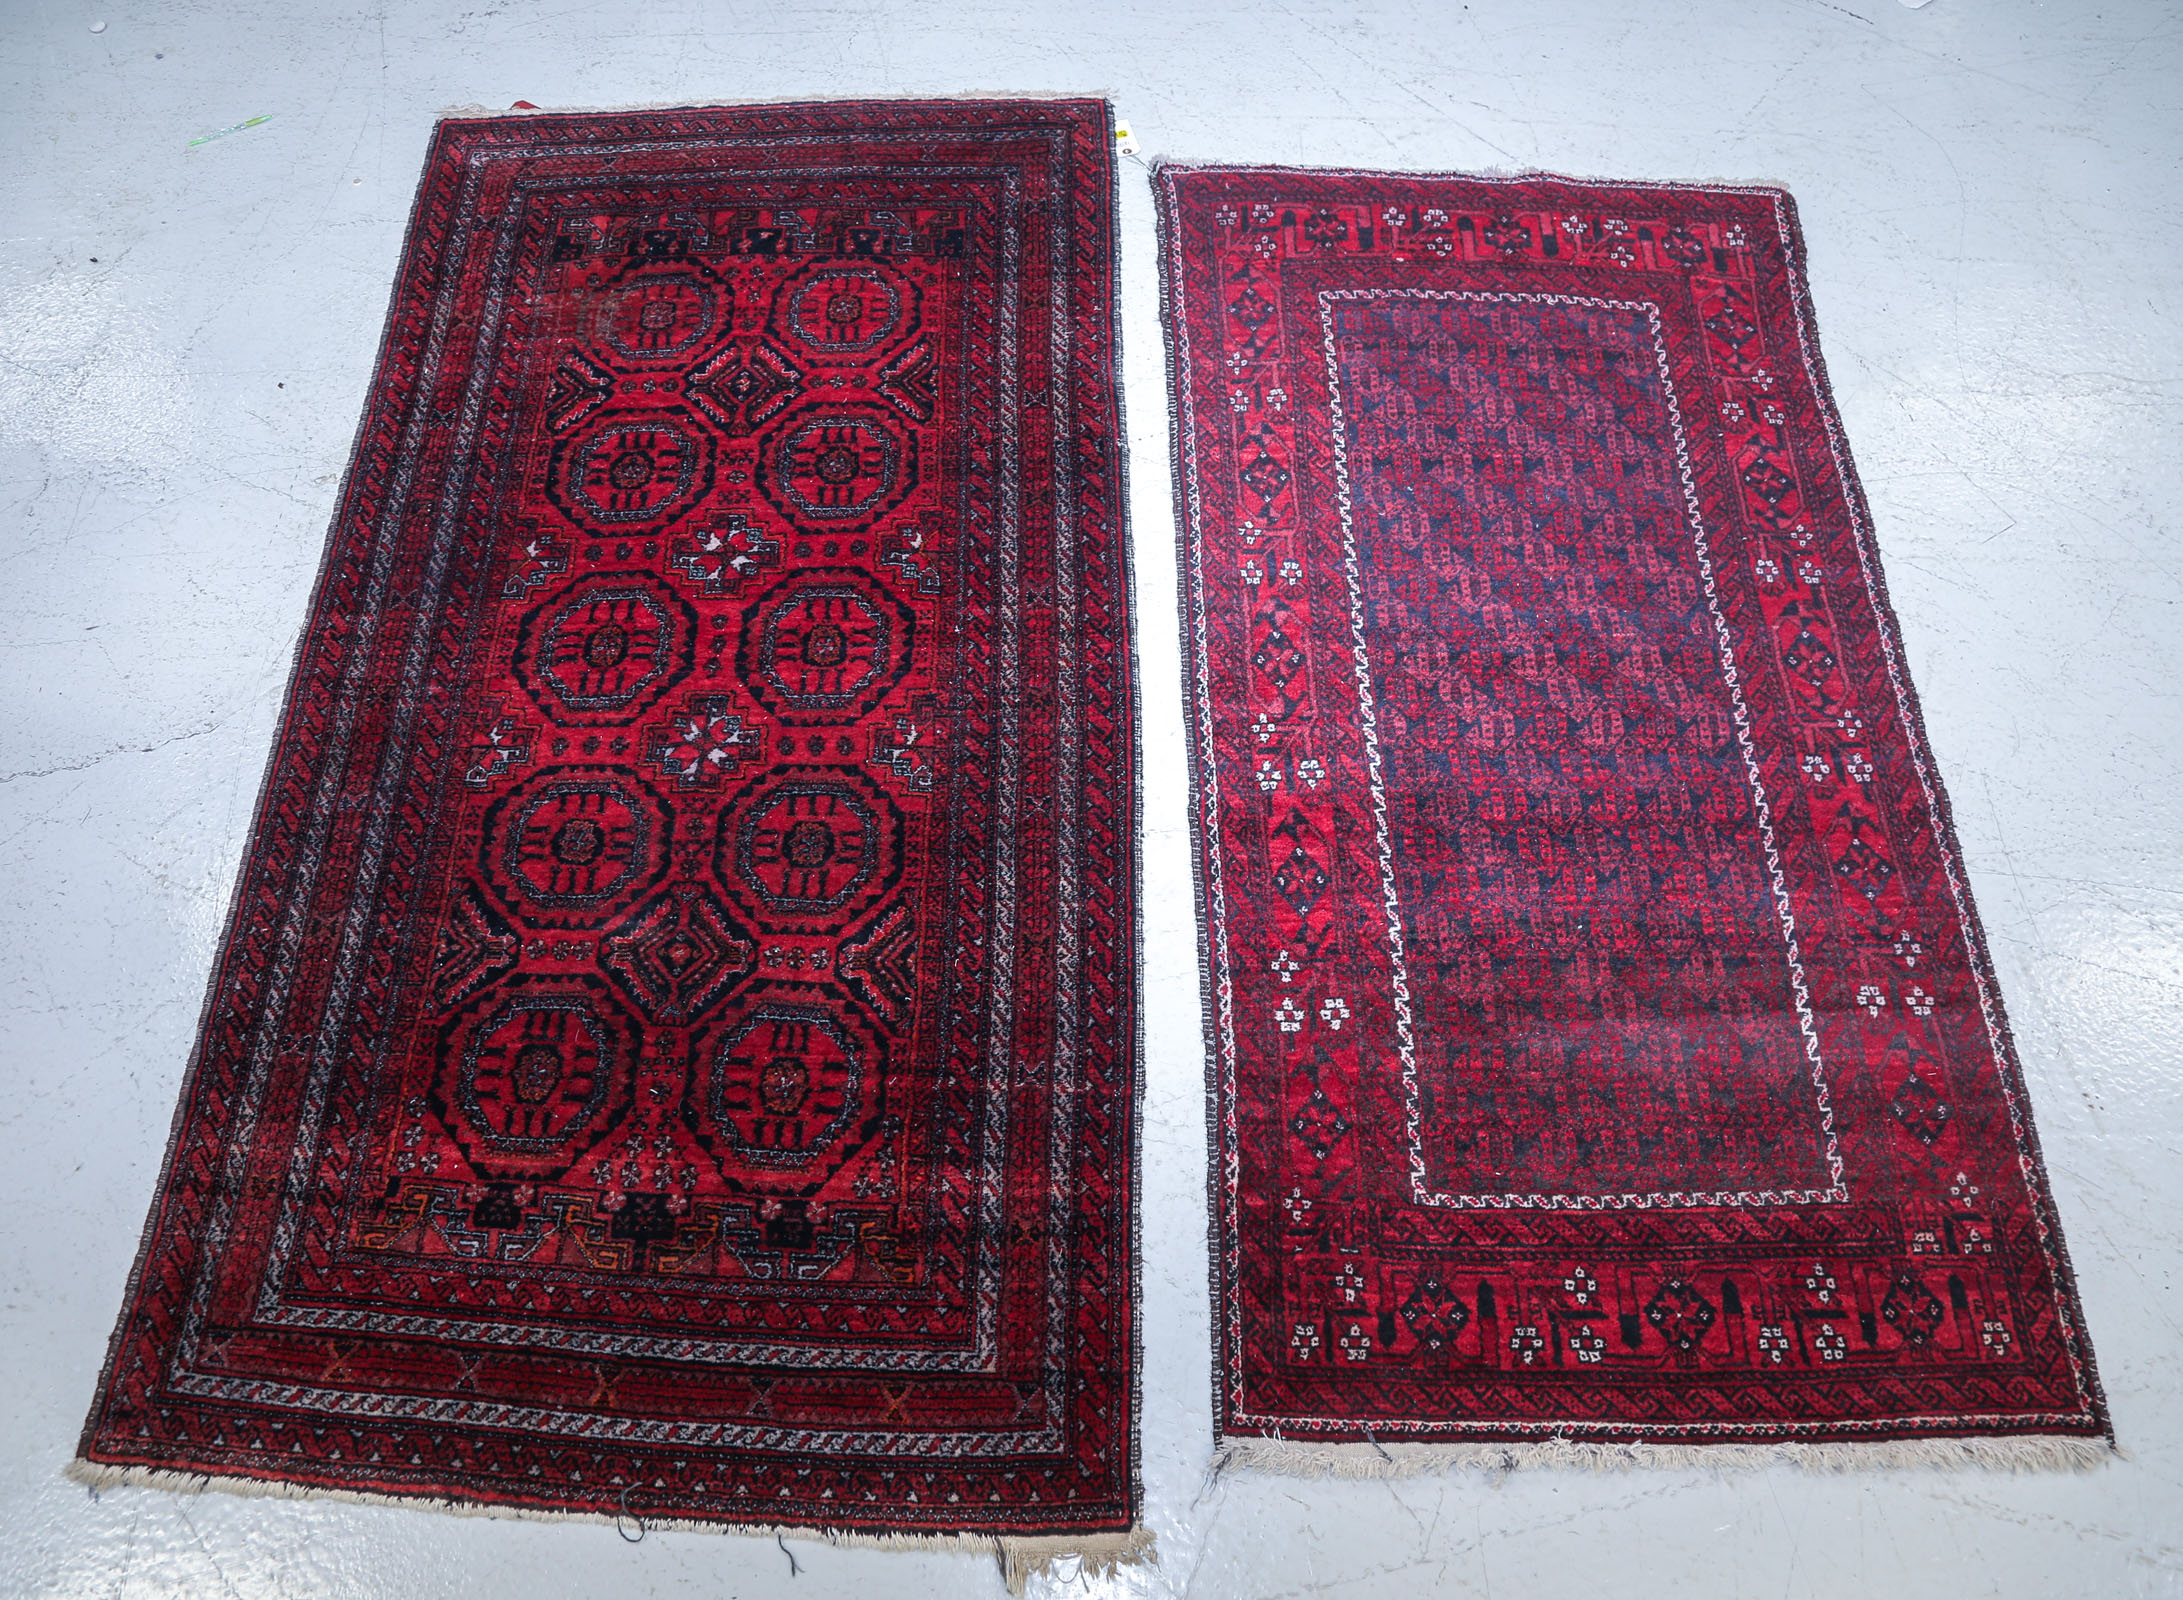 TWO BALOUCH RUGS, AFGHANISTAN,